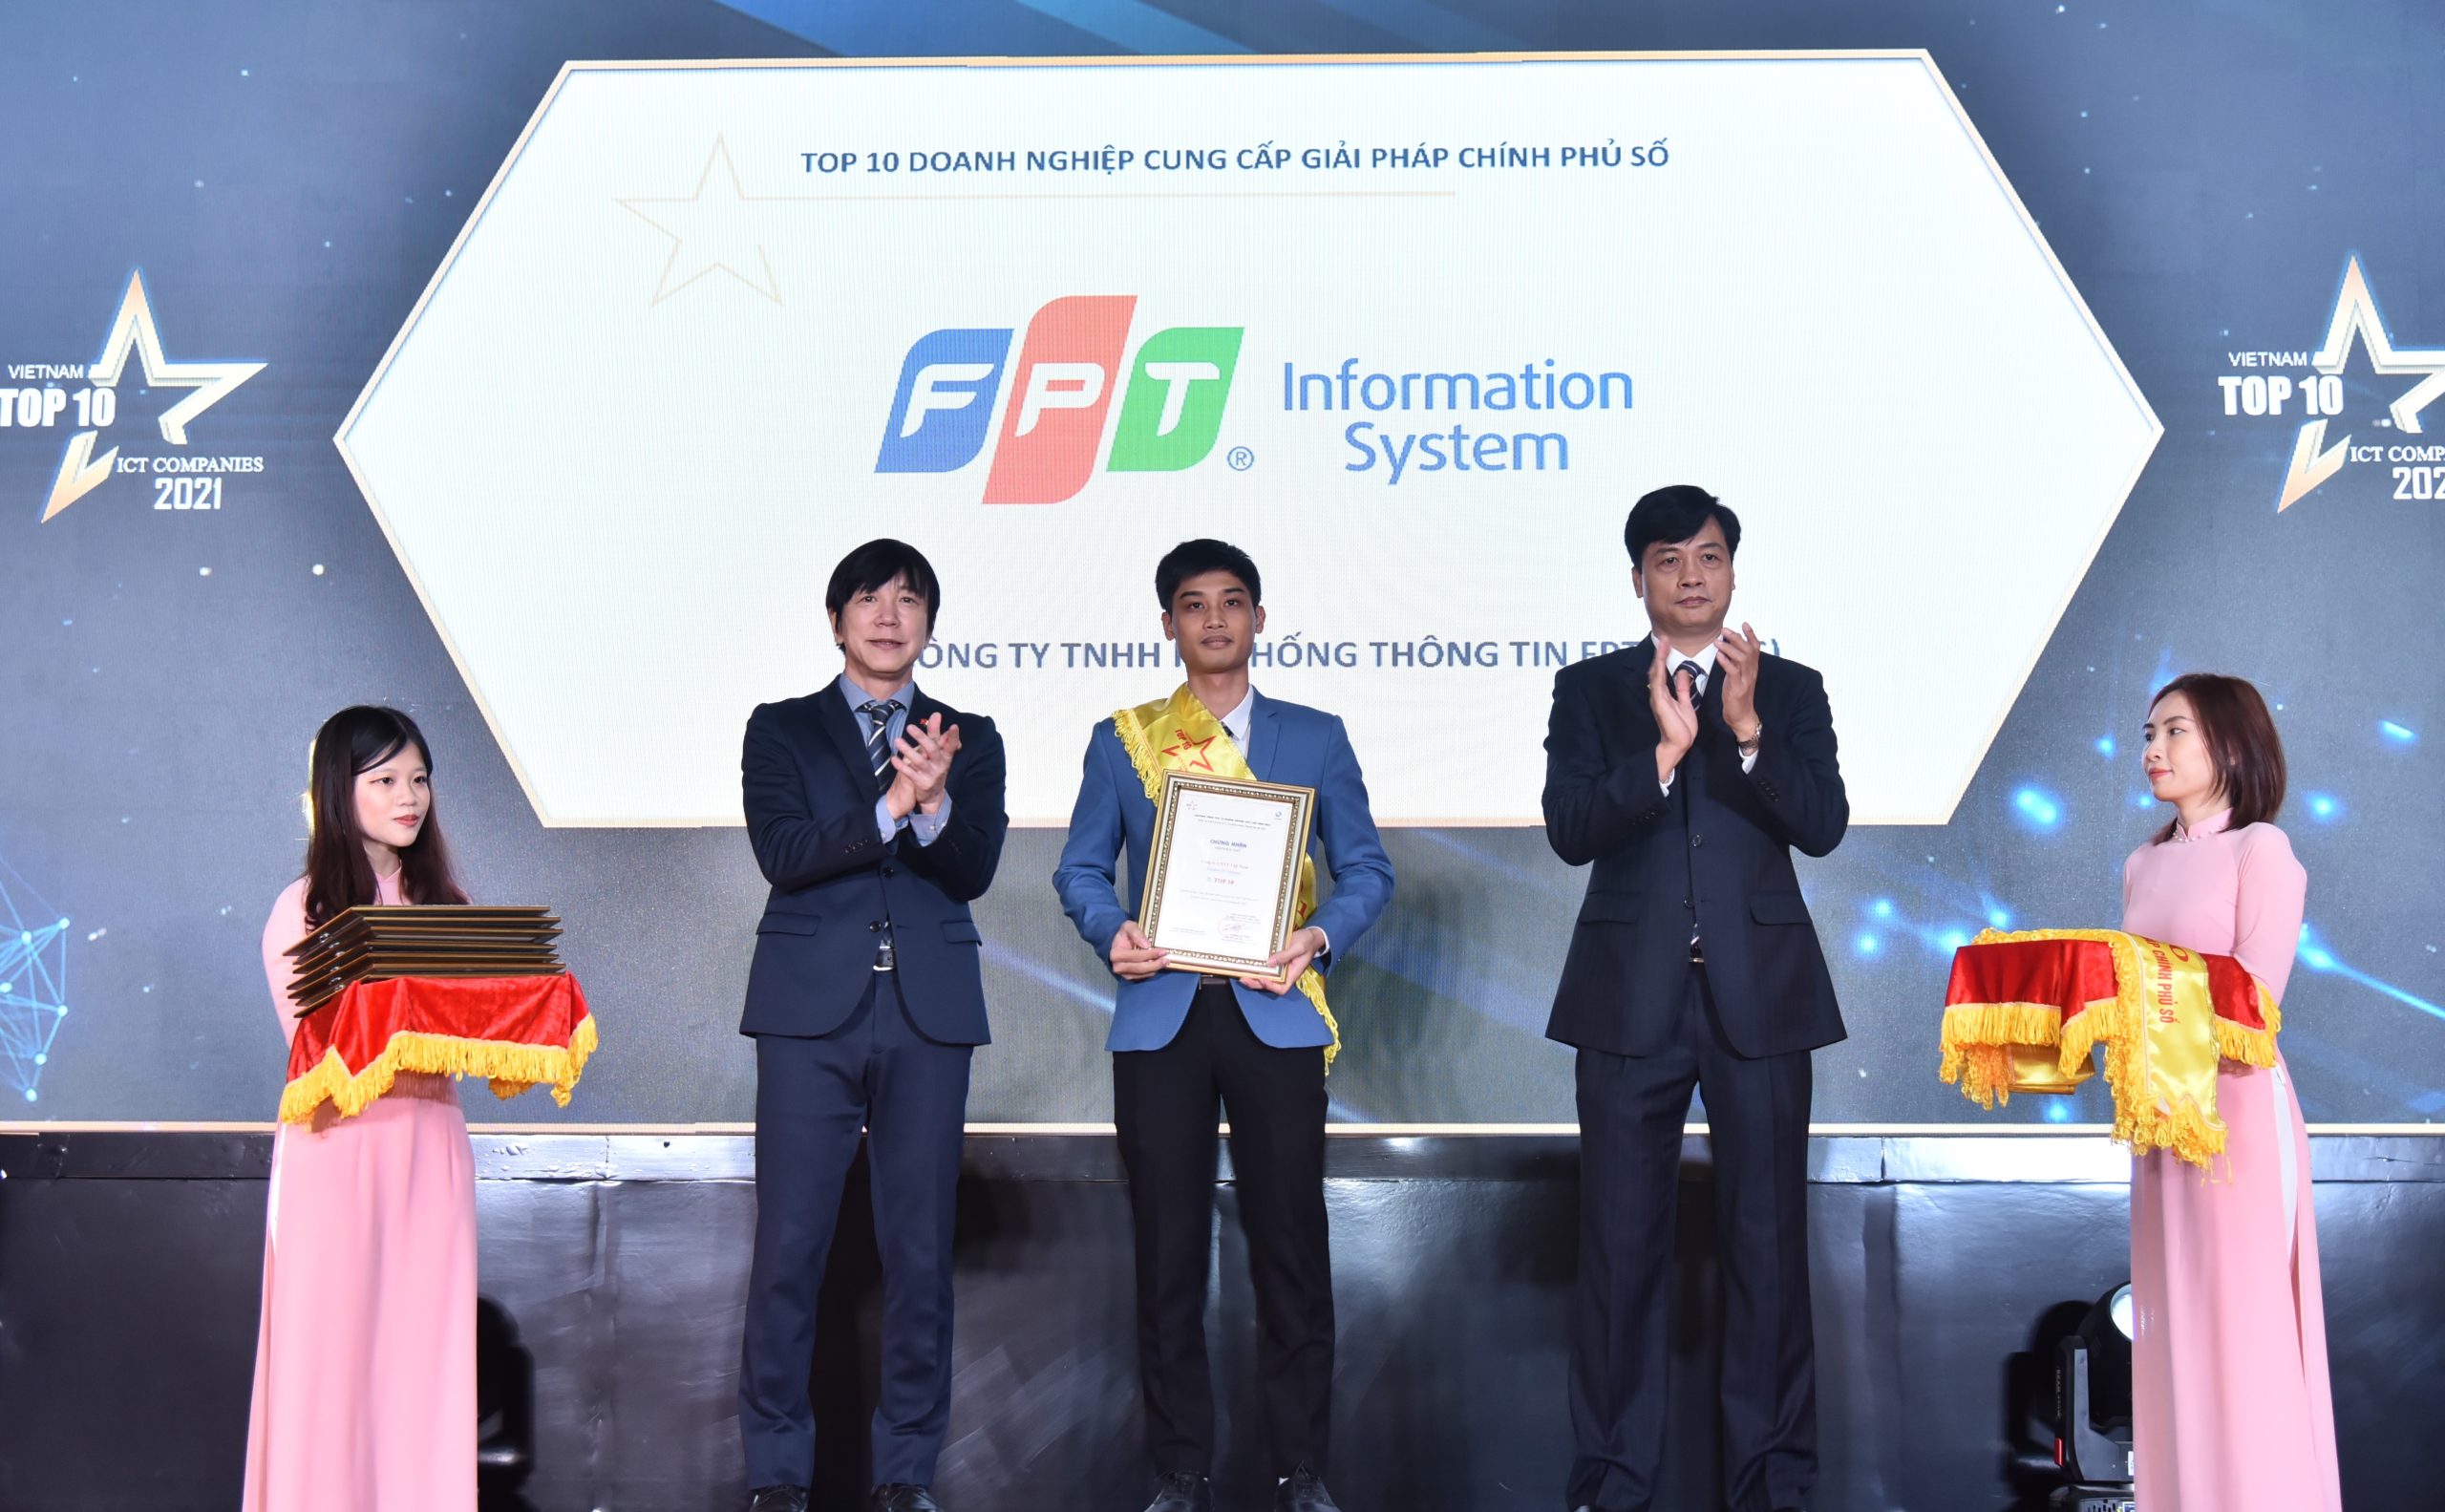 Top 10 Companies supplying Digital Government Solutions in Vietnam 2021